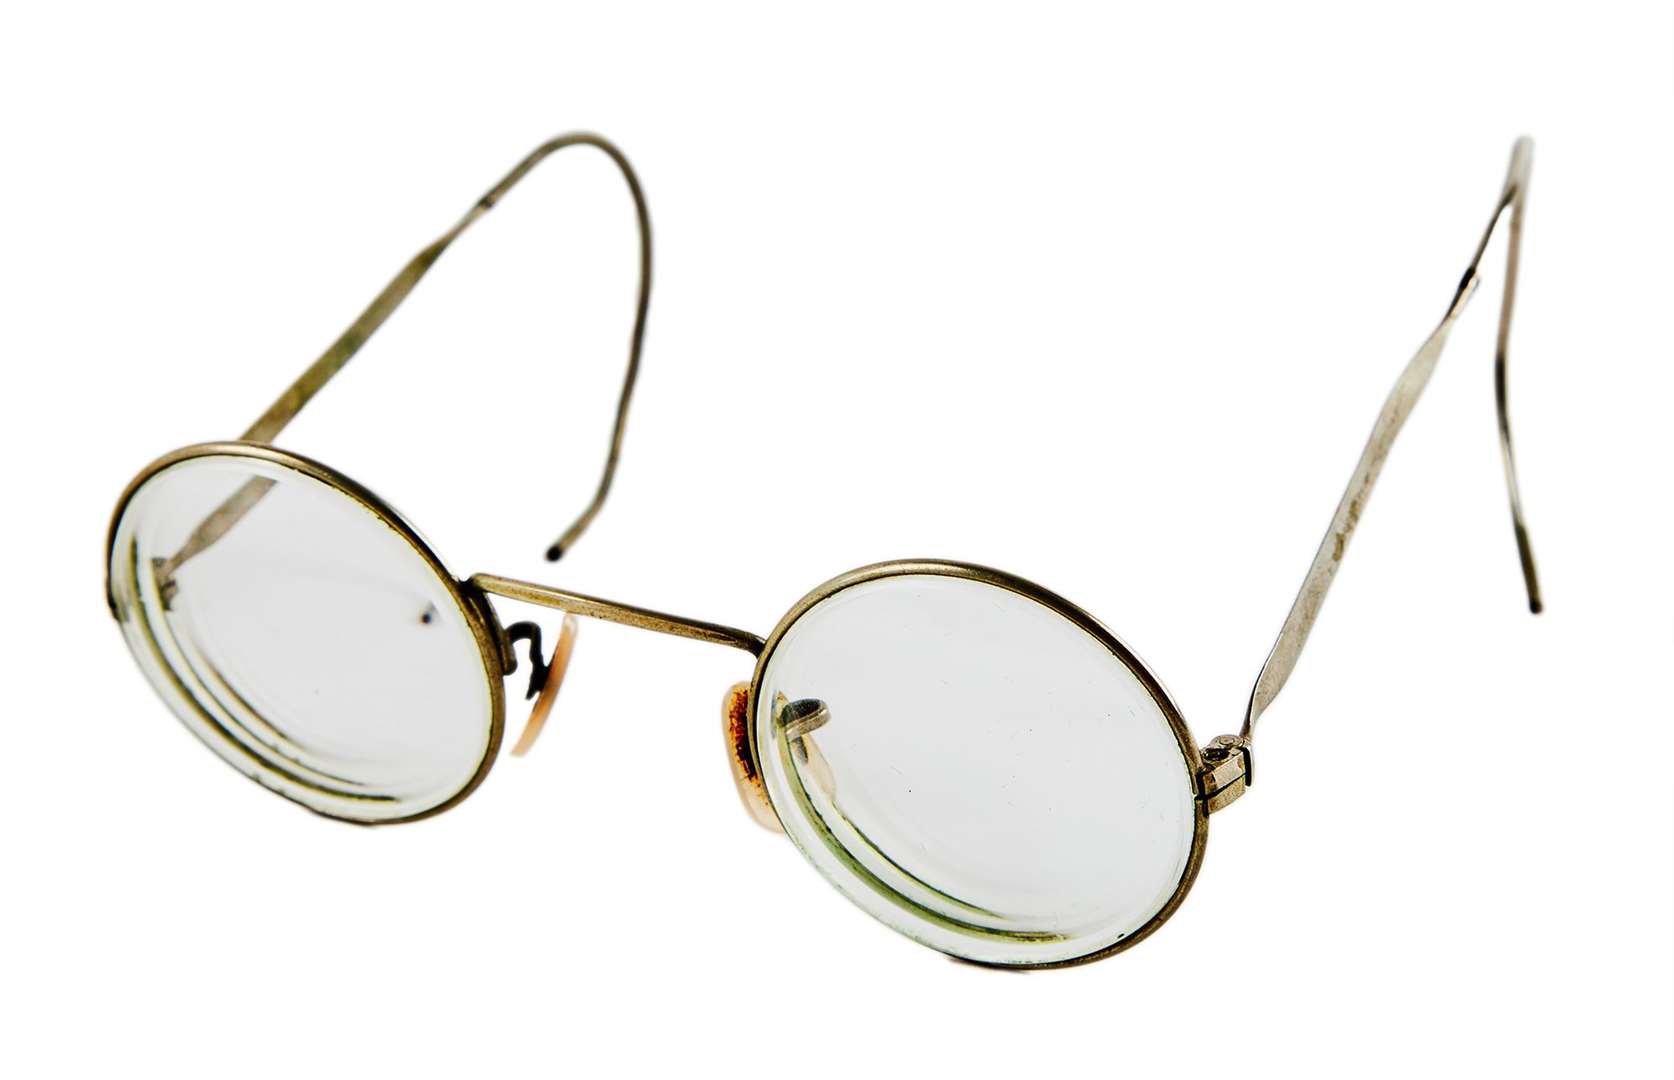 Lennon’s glasses, which became symbolic of the former Beatles frontman’s style and persona, are expected to fetch up to 80,000 dollars (£70,000) (Julien’s Auctions/PA)